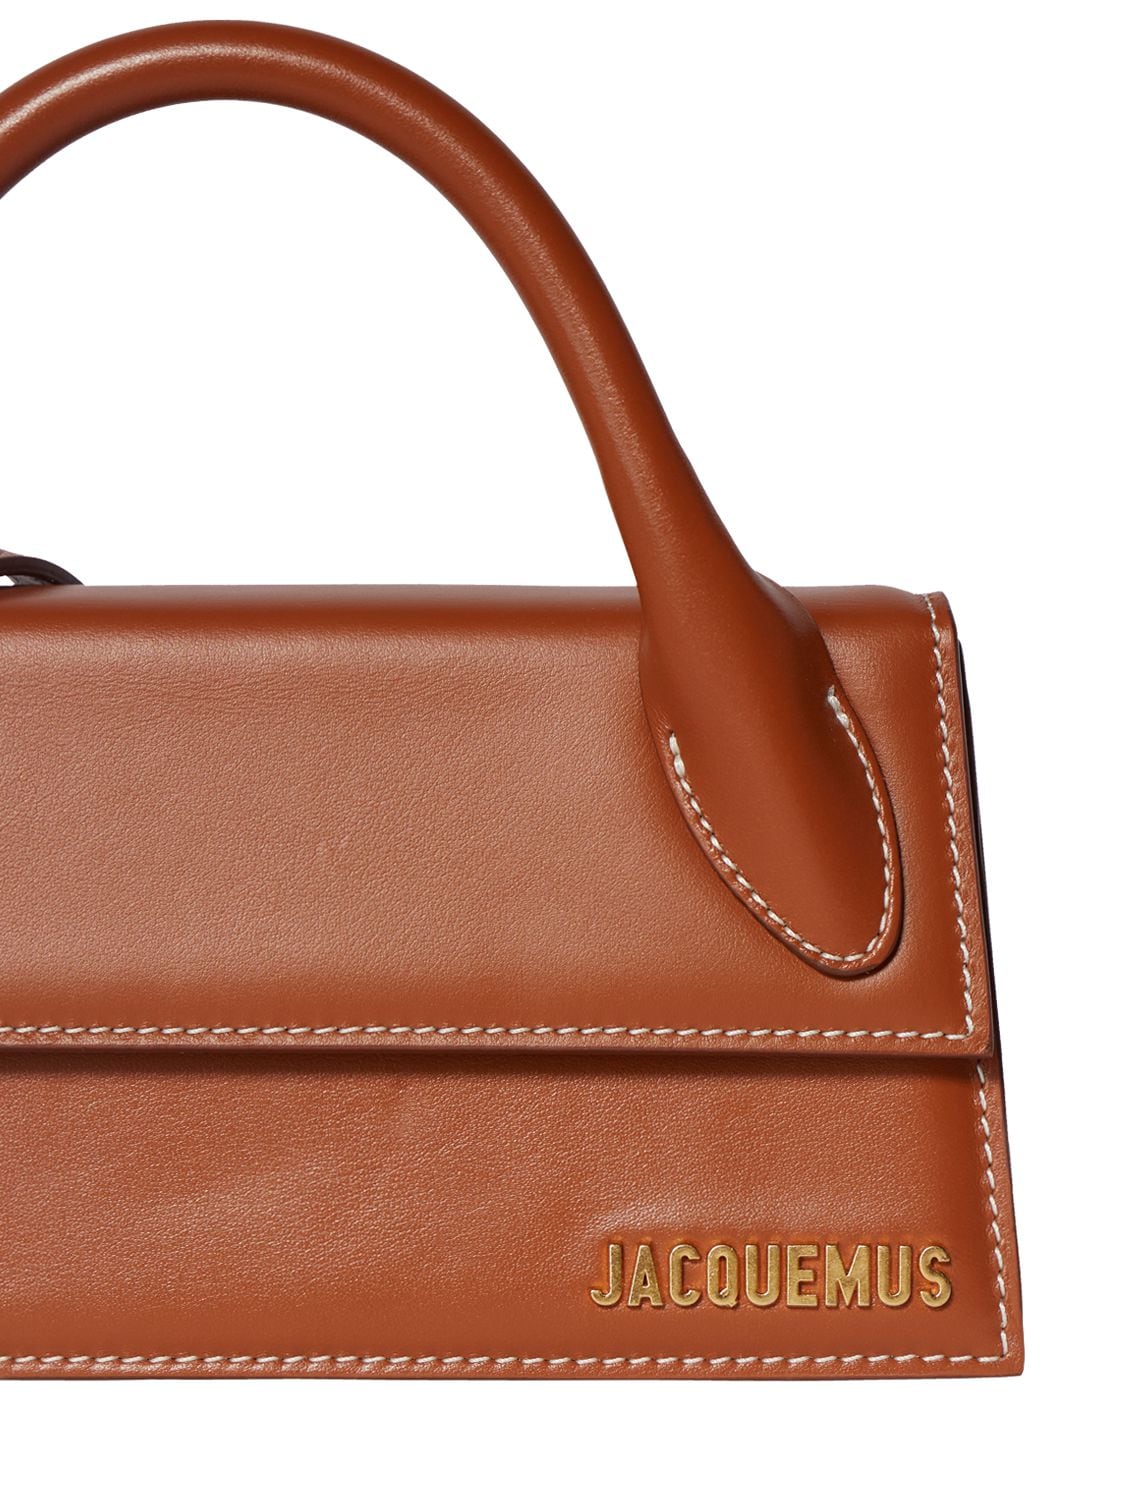 Jacquemus Le Chiquito Long Leather Top Handle Bag In Brown